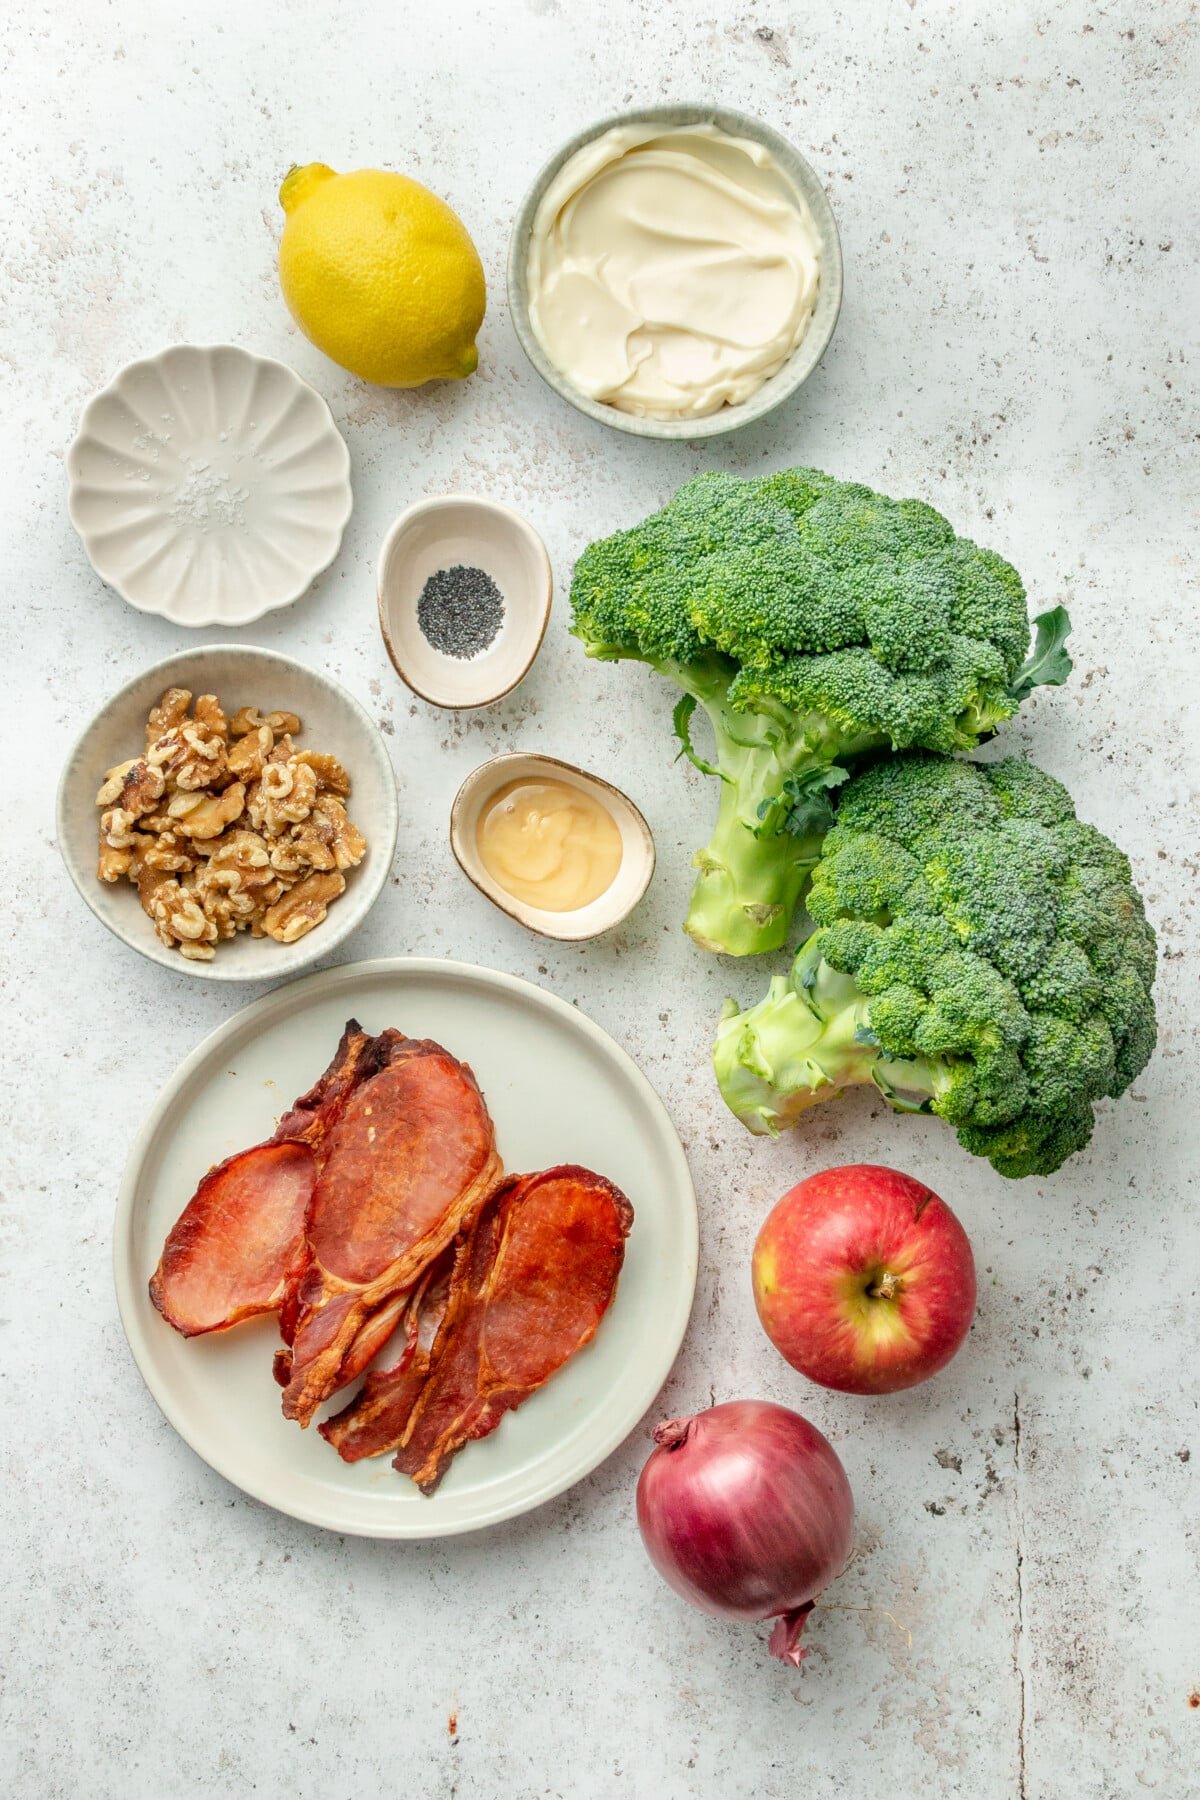 Ingredients for crunchy broccoli salad sit in a variety of plates and bowls on a light grey surface.